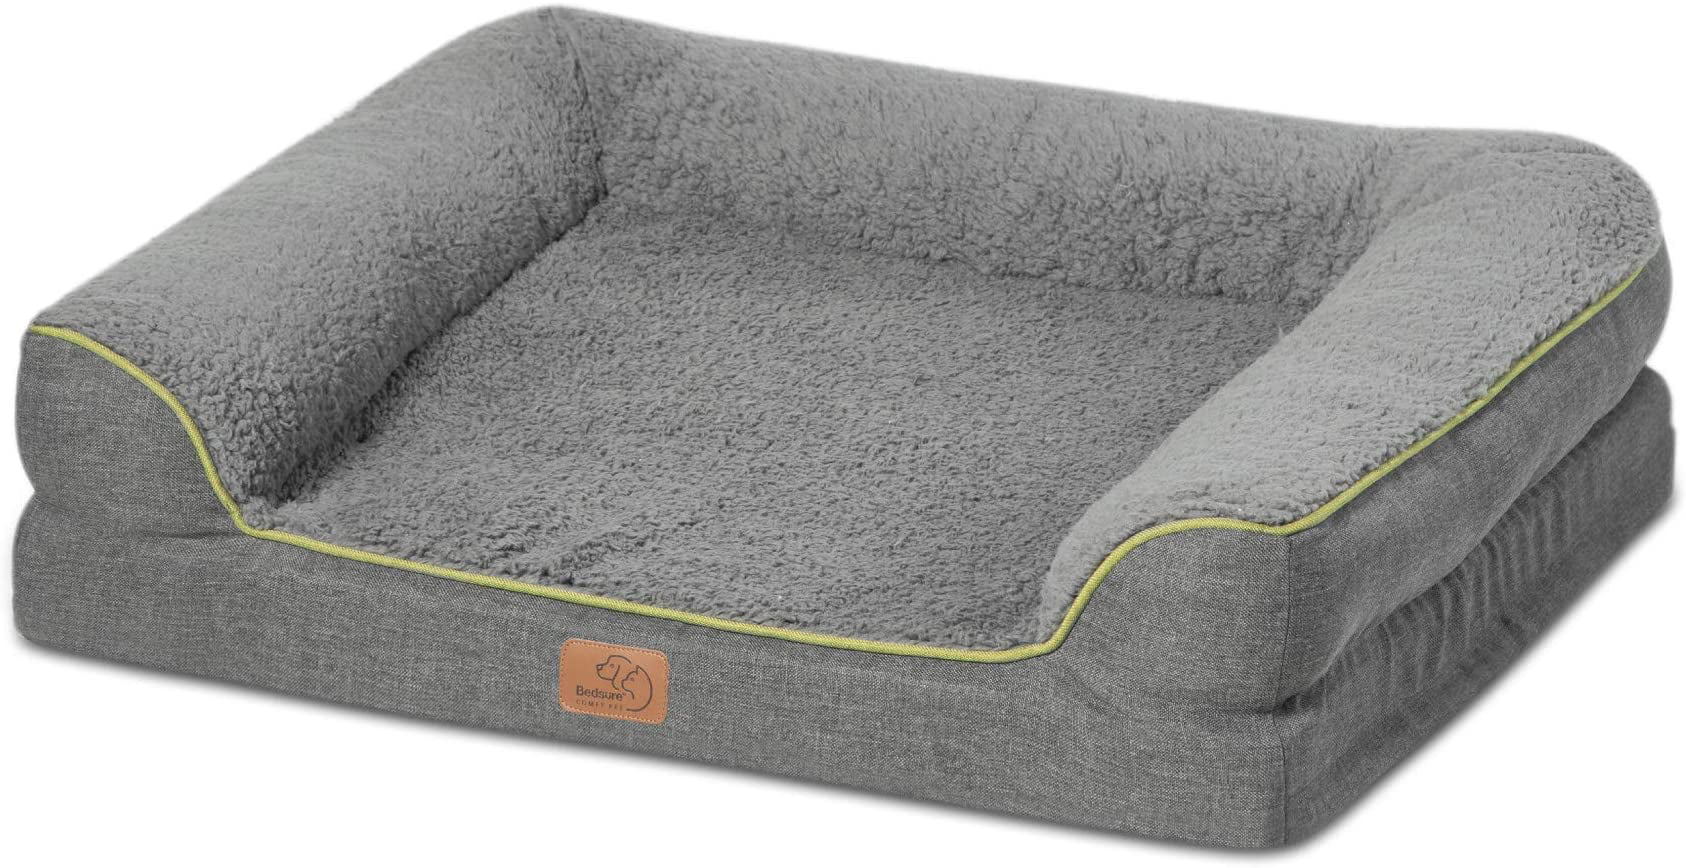 Large Dog Bed Orthopedic Sofa Dog Bed Waterproof Pet Dog Bed for Large XL and XXL Dog Washable Pet Sofa Beds with Removable Cover & Anti-Slip Bottom 